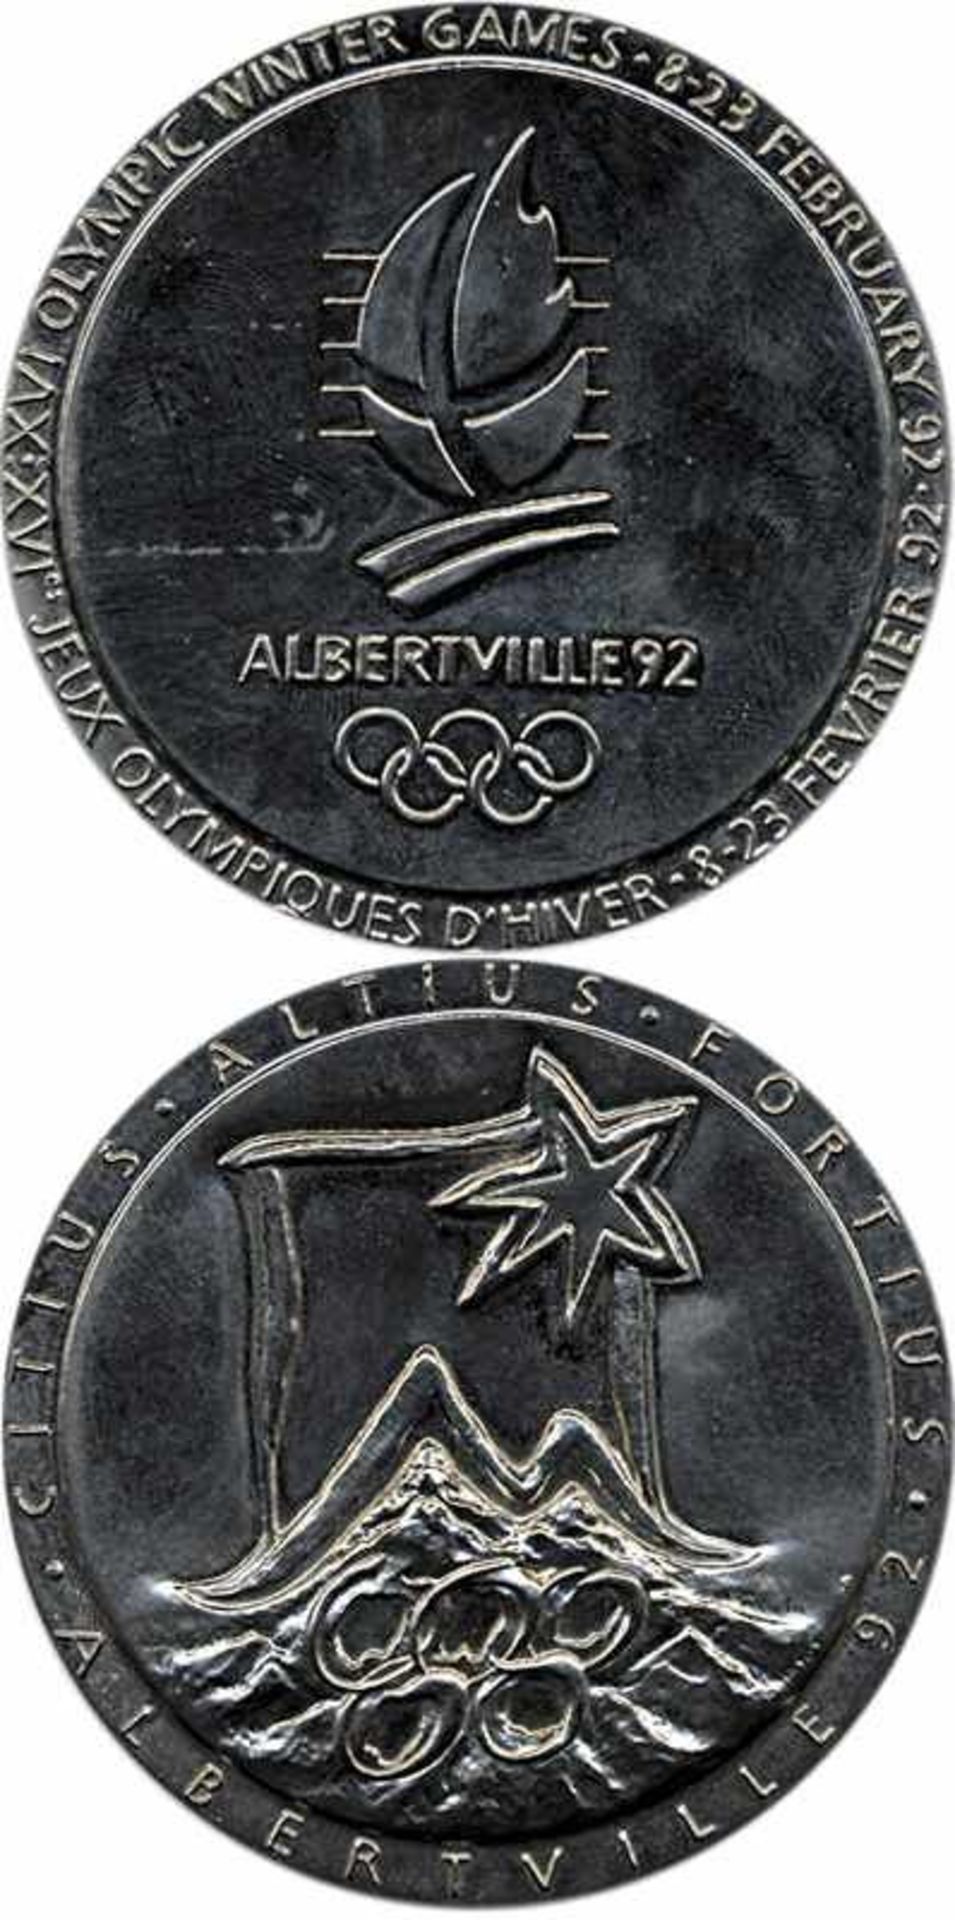 Participation Medal: Olympic Games1992 - Official Medal from Albertville for athlets. Stainless